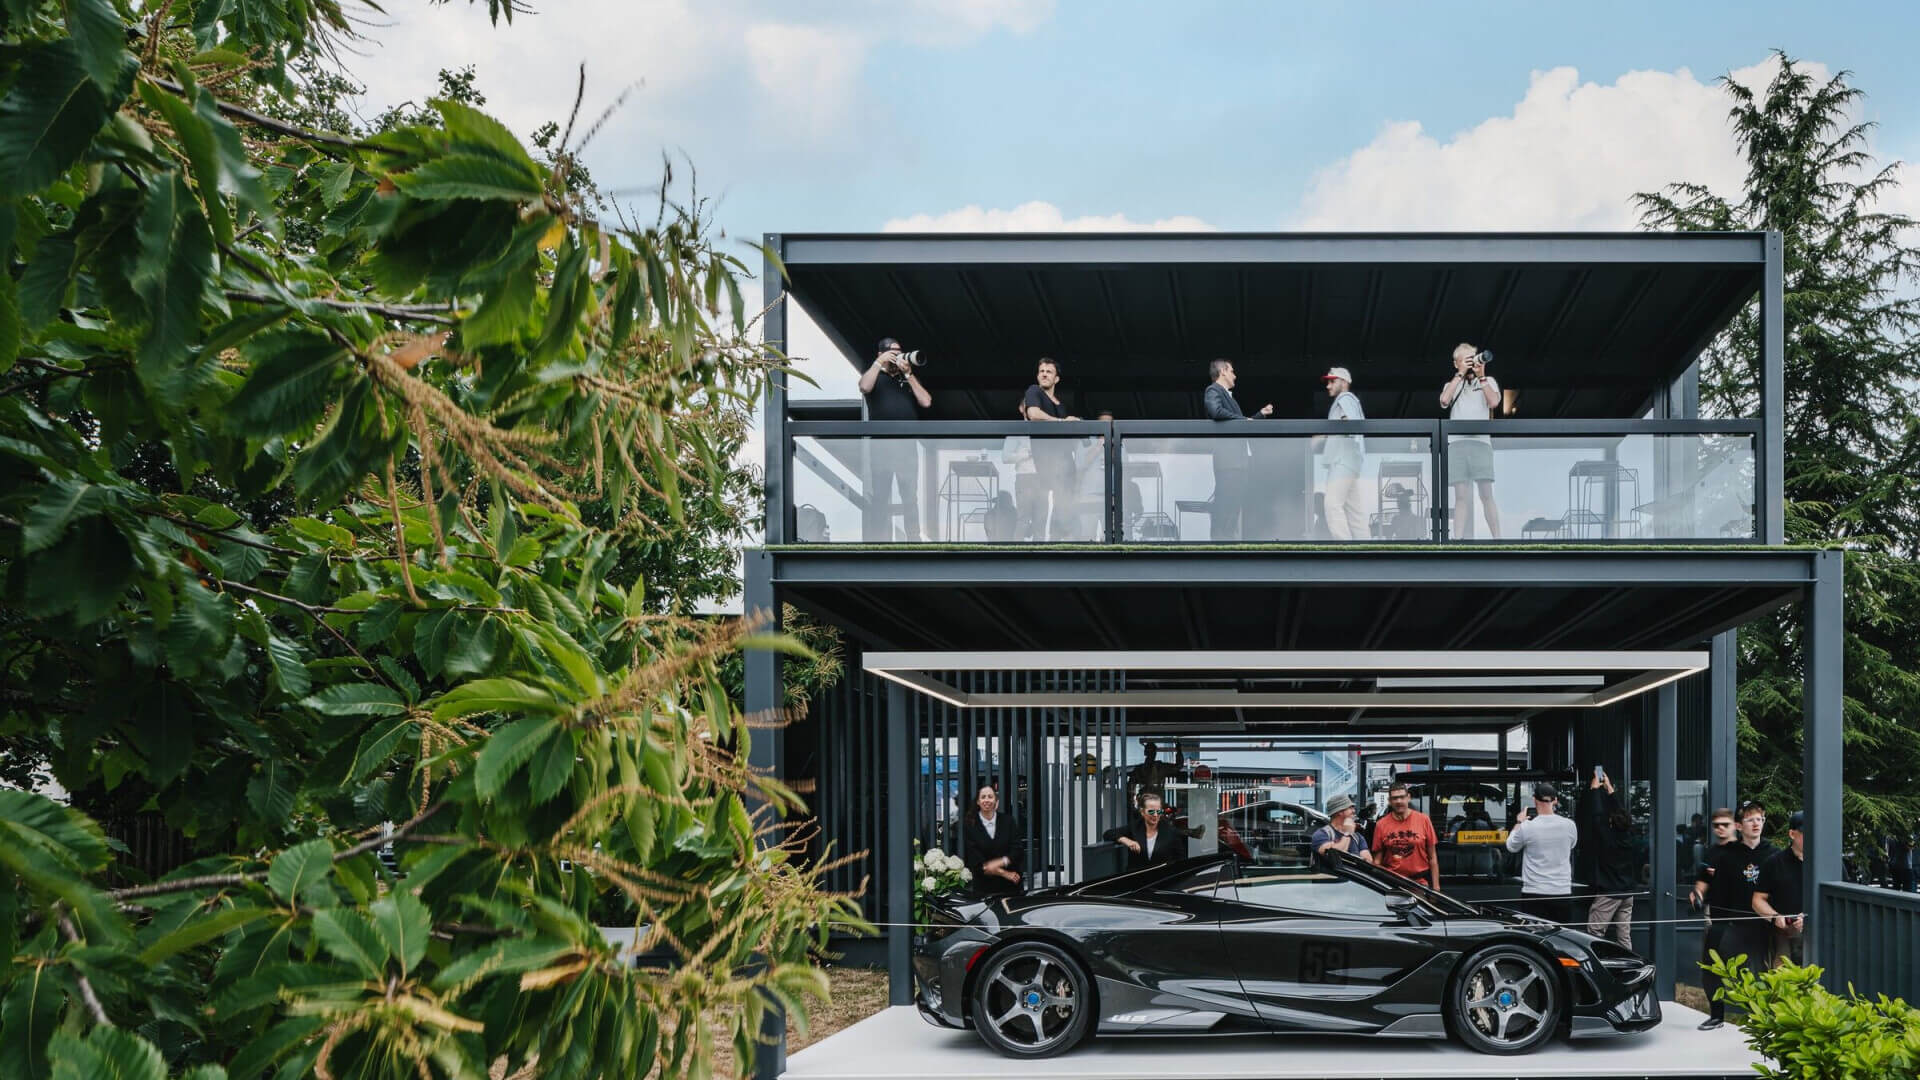 Creating a Sustainable Pavilion at the Goodwood Festival of Speed